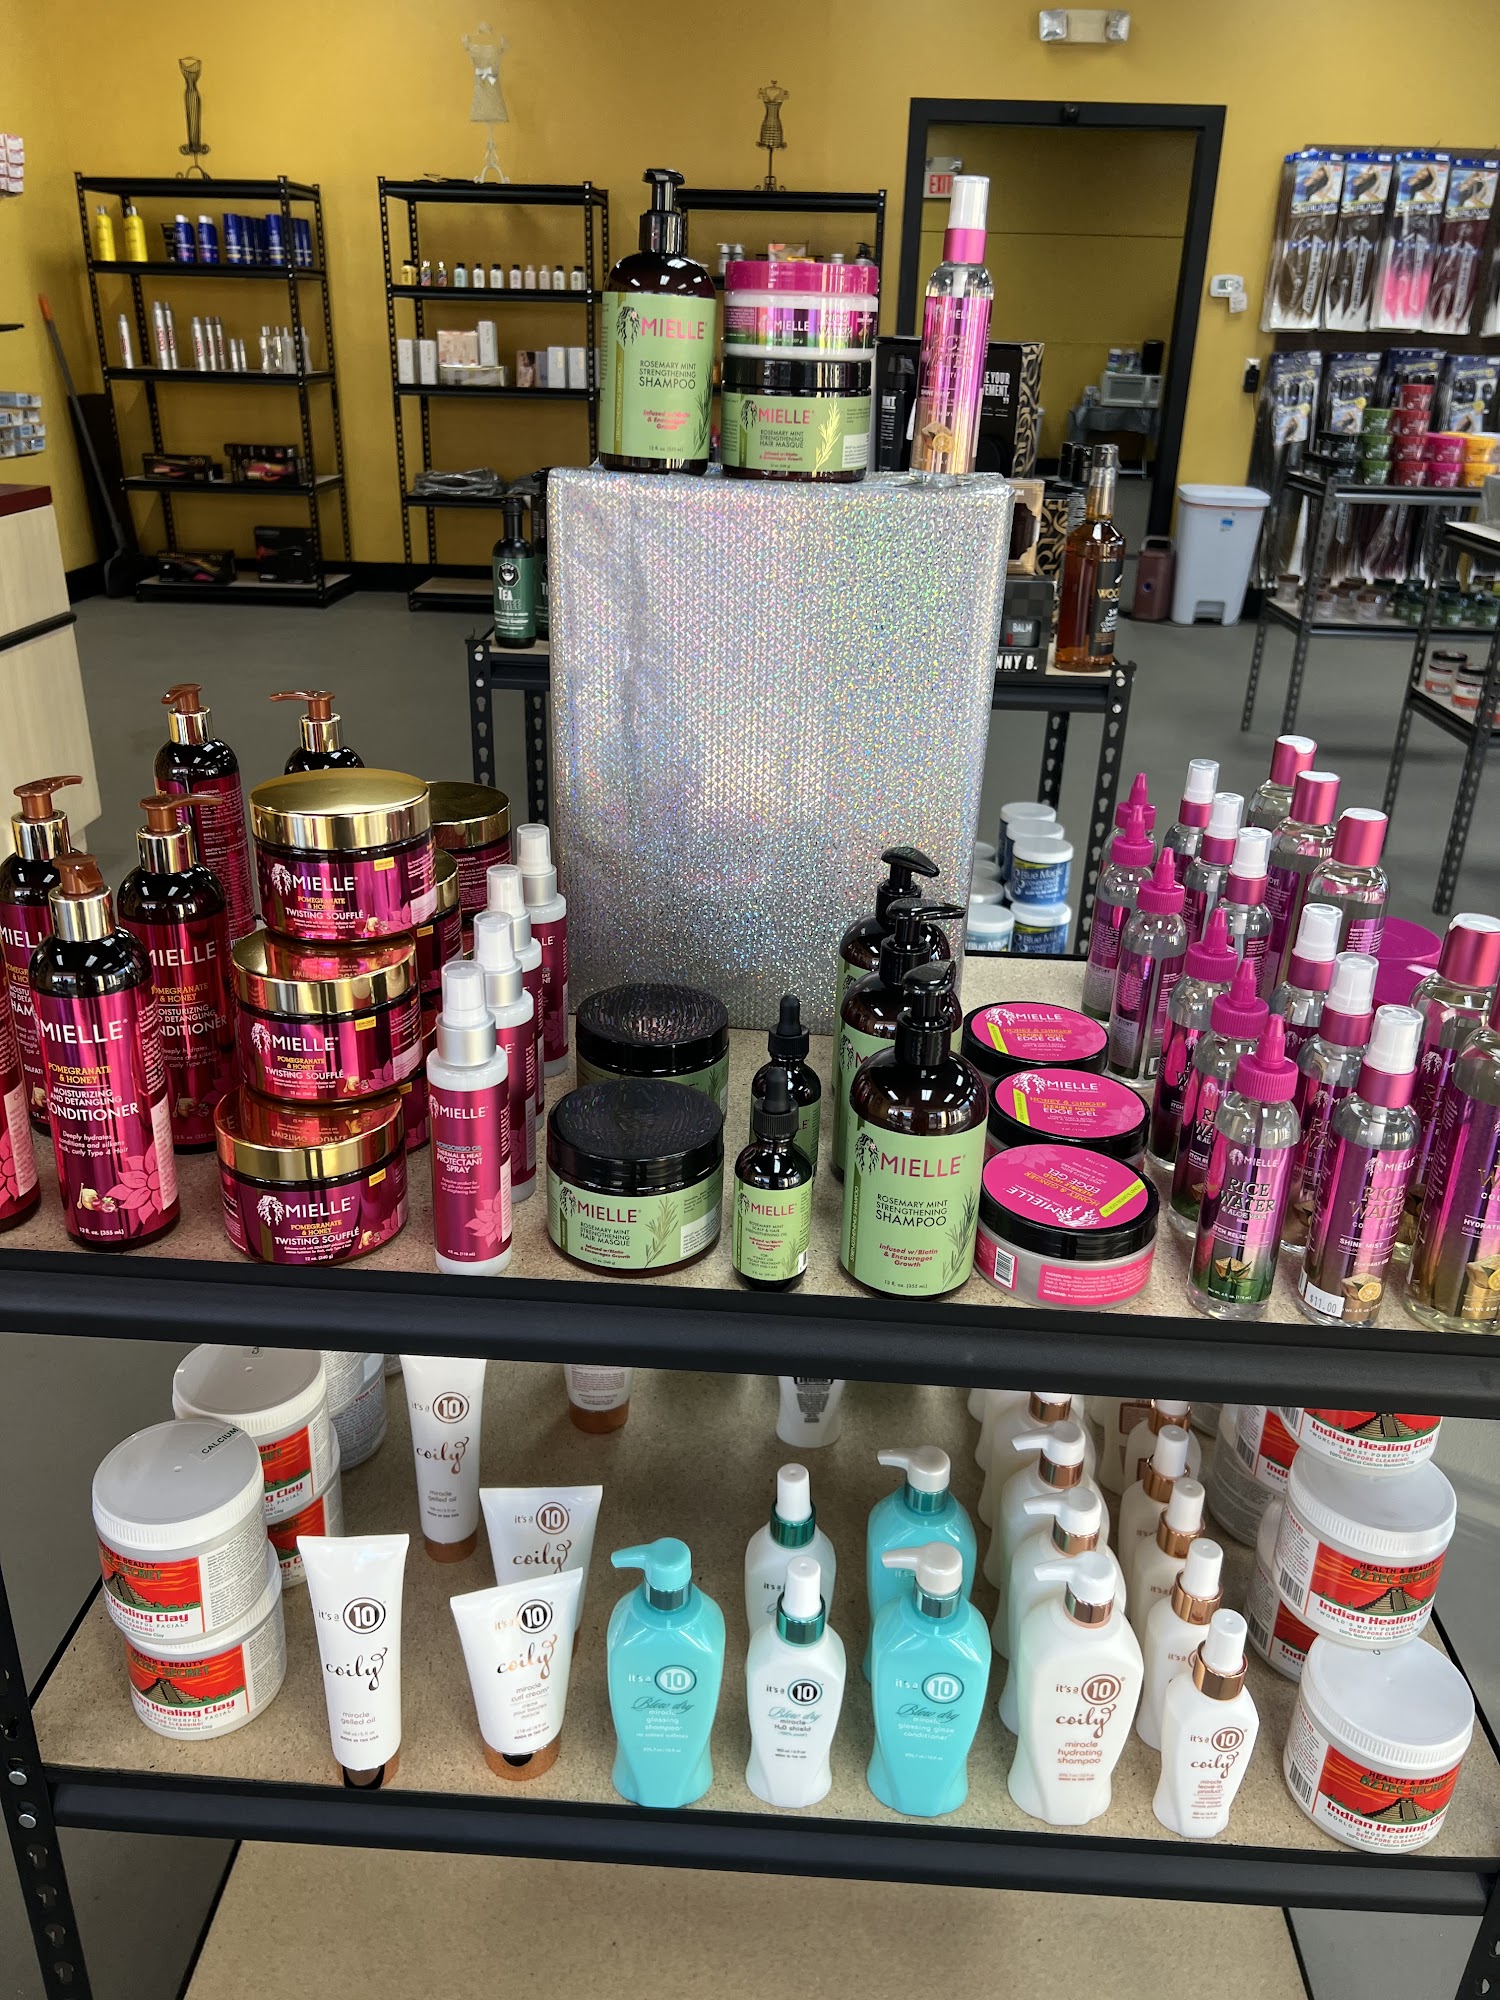 Onyx Beauty Supply Salon And Barbershop 439 Outlet Center Dr, Queenstown Maryland 21658